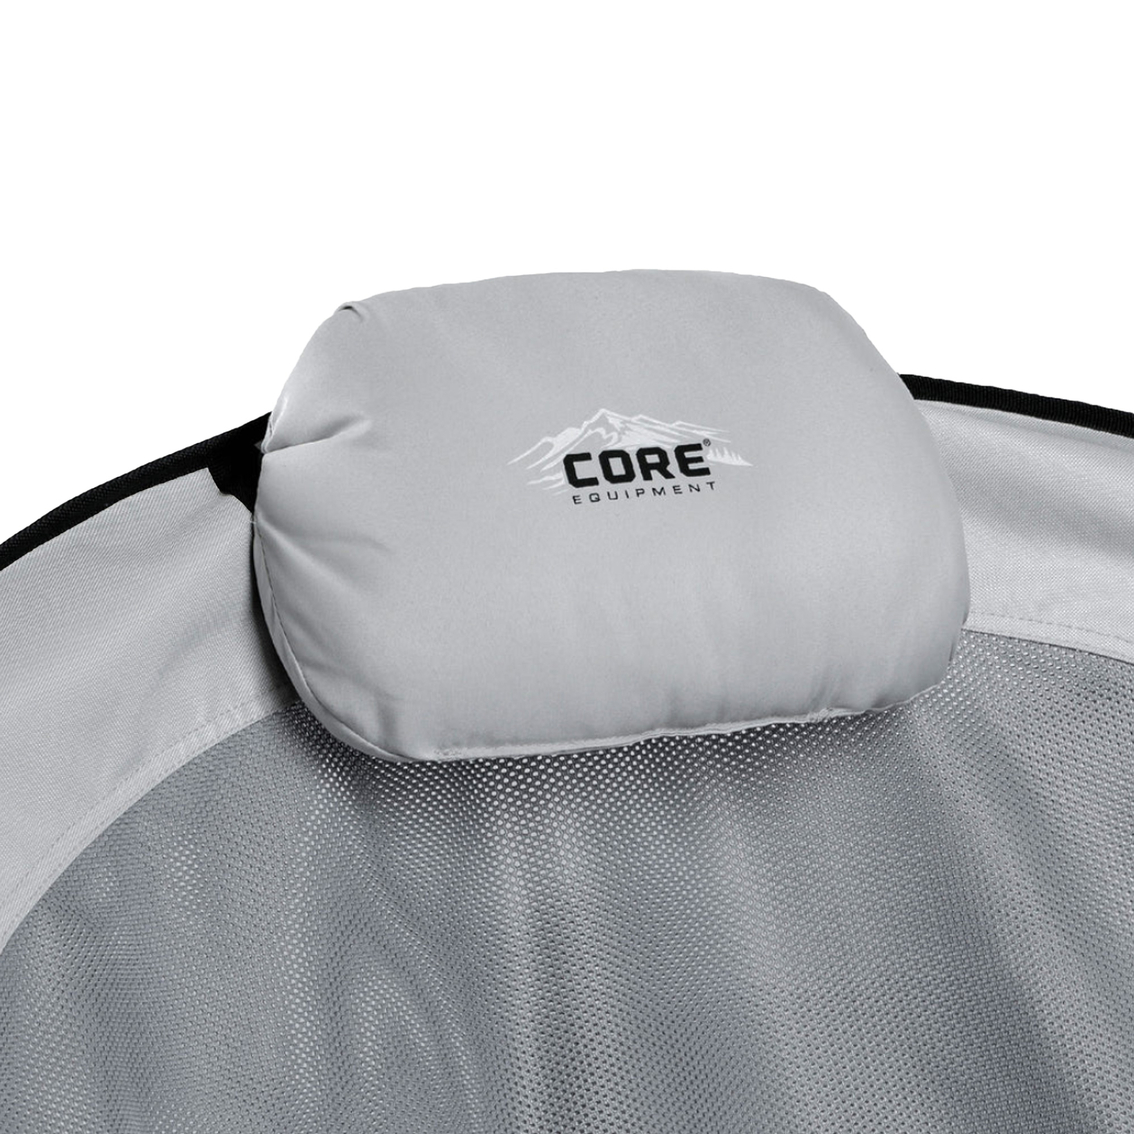 Core Oversized Padded Round Mesh Chair - Image 4 of 5